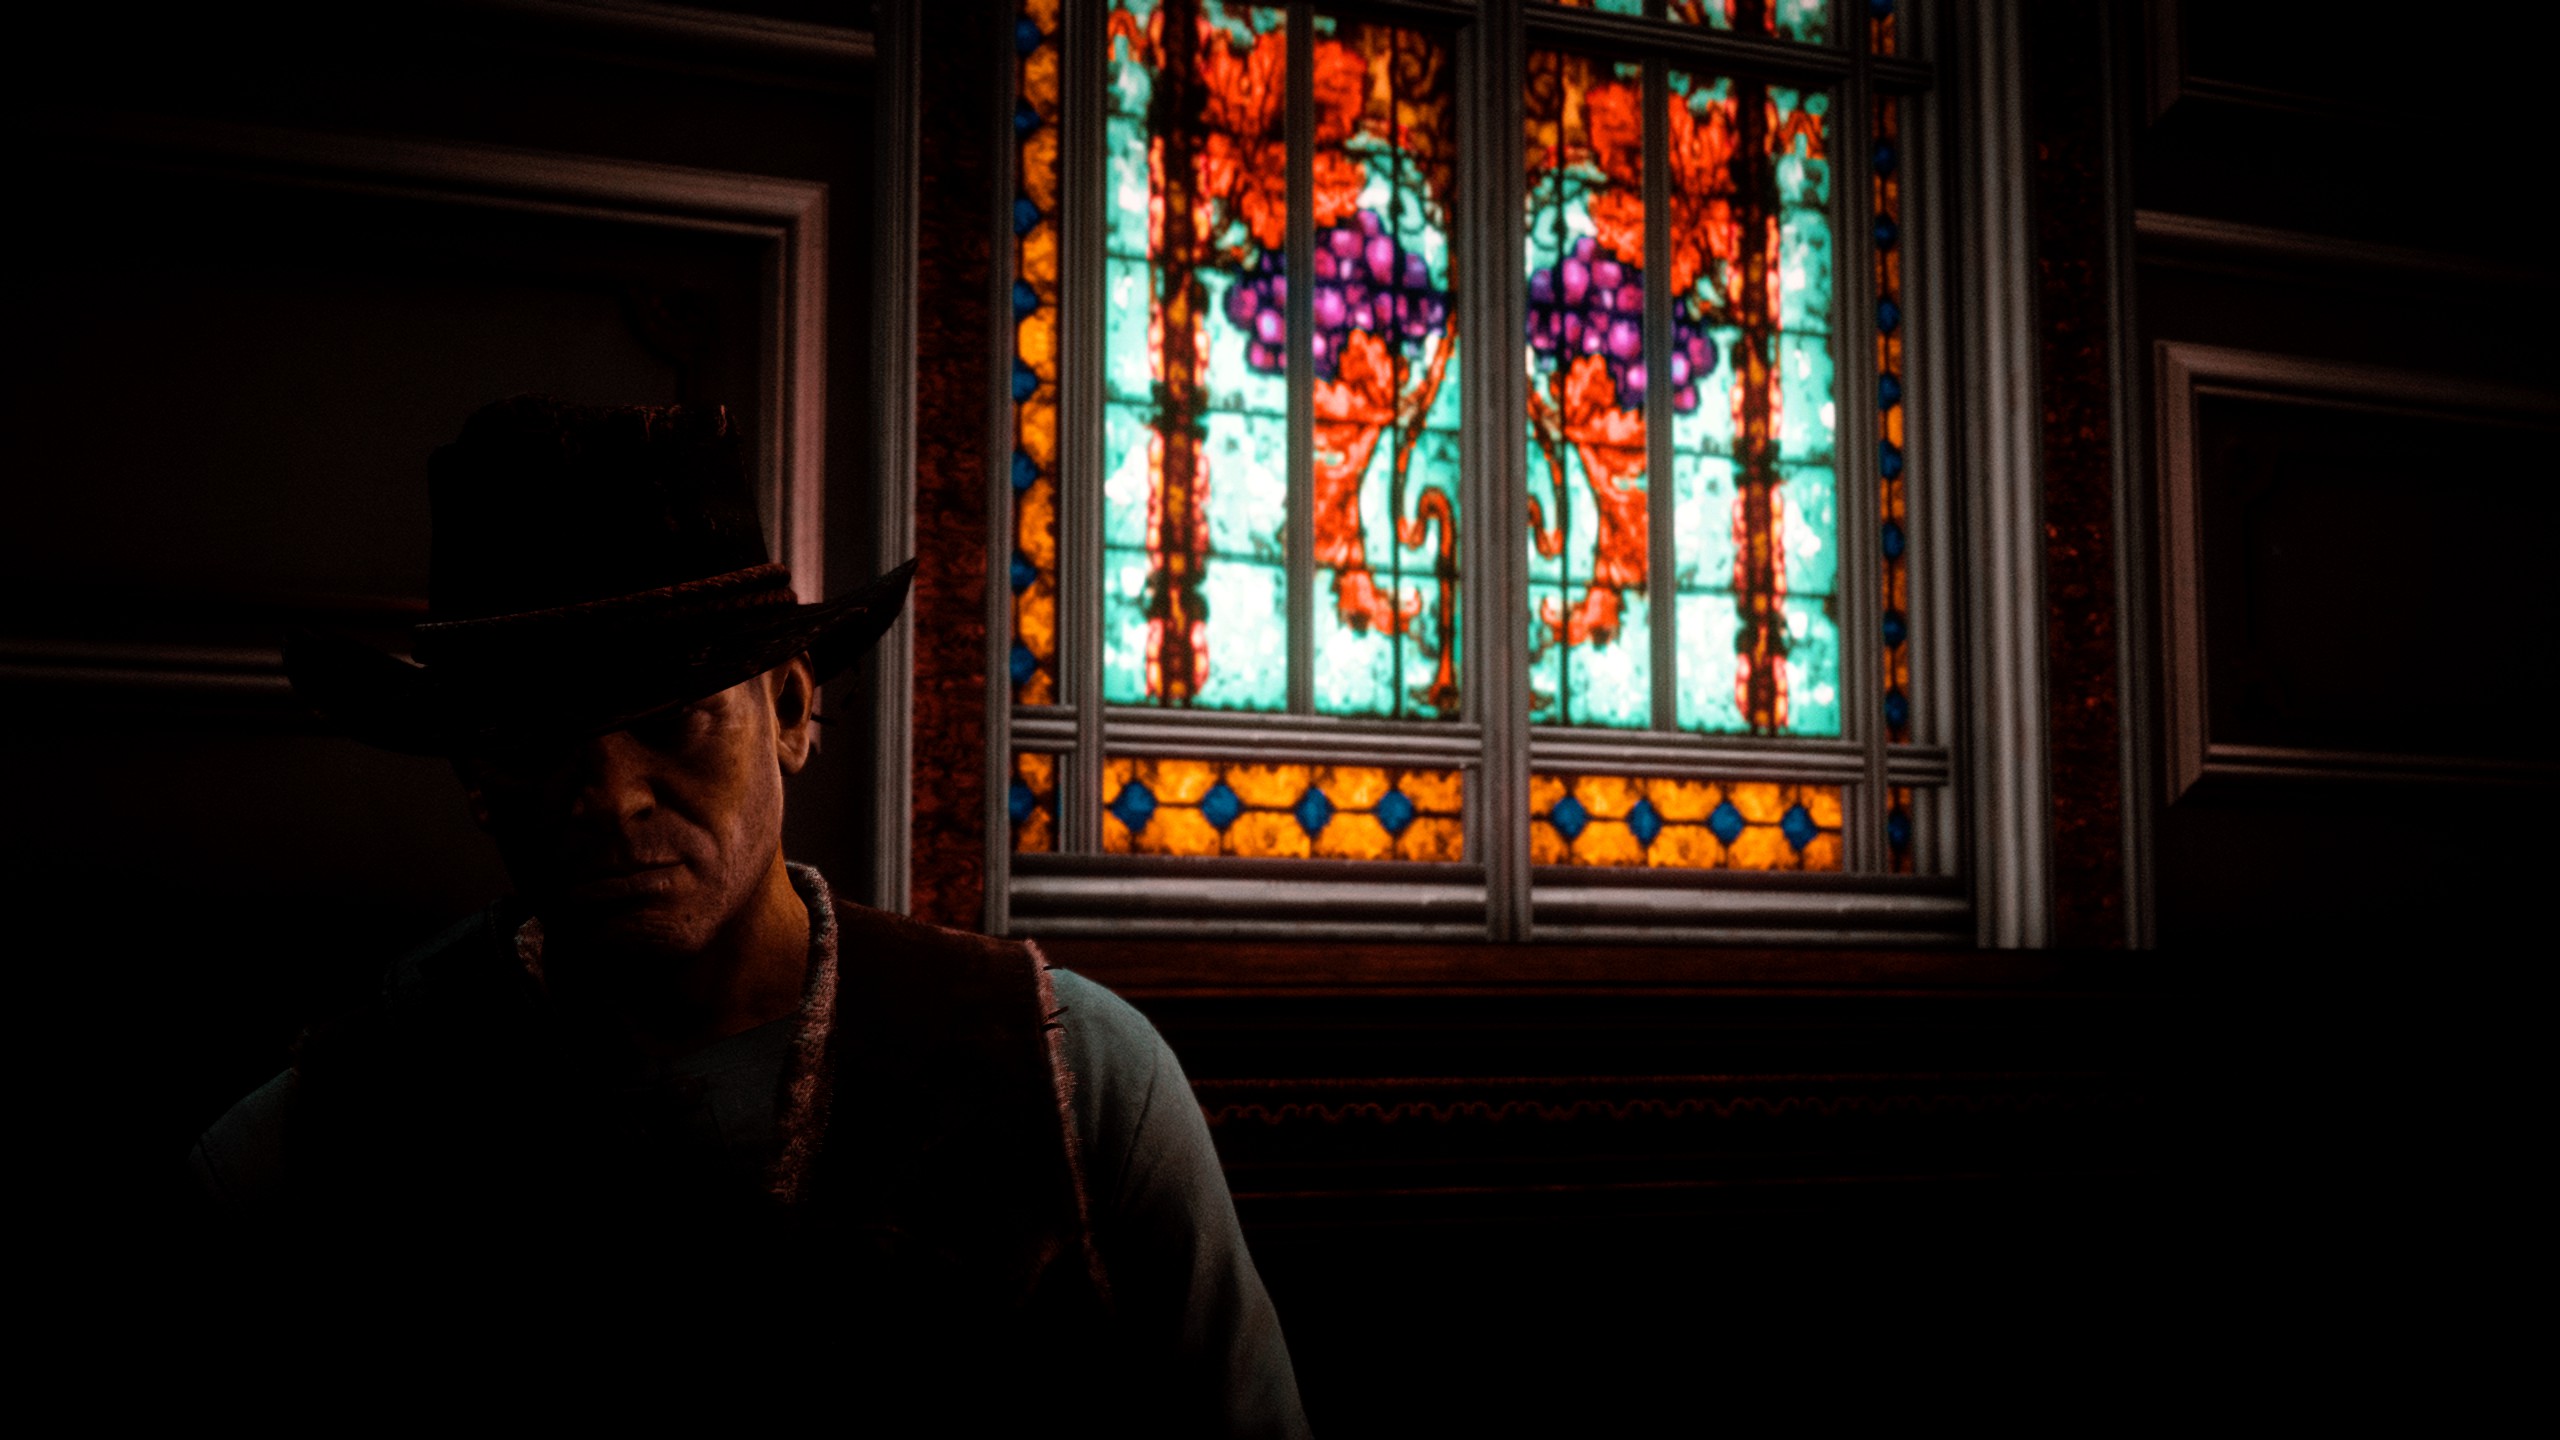 General 2560x1440 Red Dead Redemption 2 video game characters CGI Rockstar Games low light stained glass video games Arthur Morgan window hat video game art screen shot cowboy hats video game men face men with hats cowboys